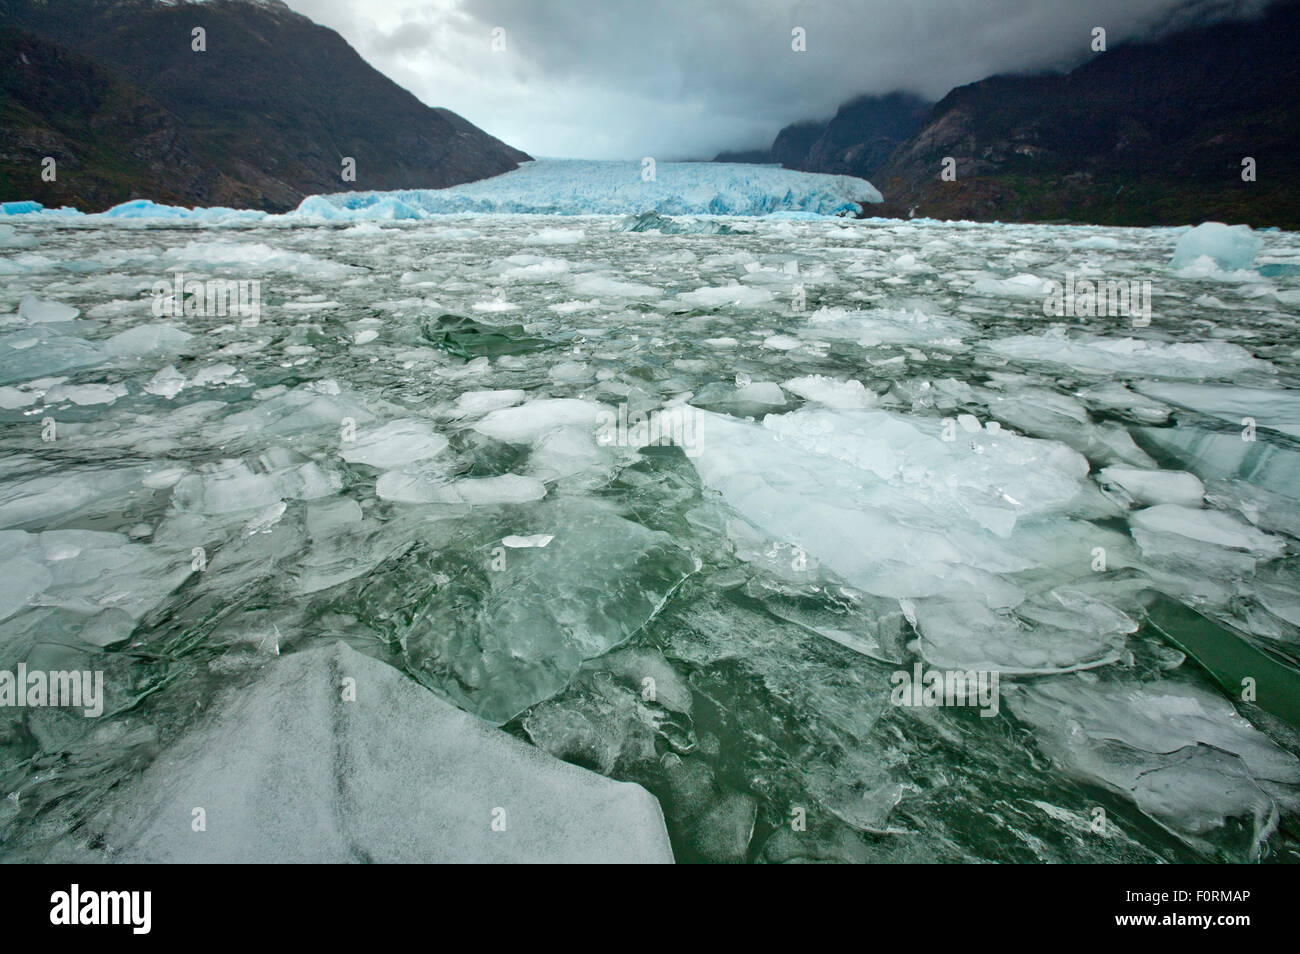 Floating ice below the San Rafael Glacier. Northern Patagonian Ice Field, Patagonia, Chile. Stock Photo